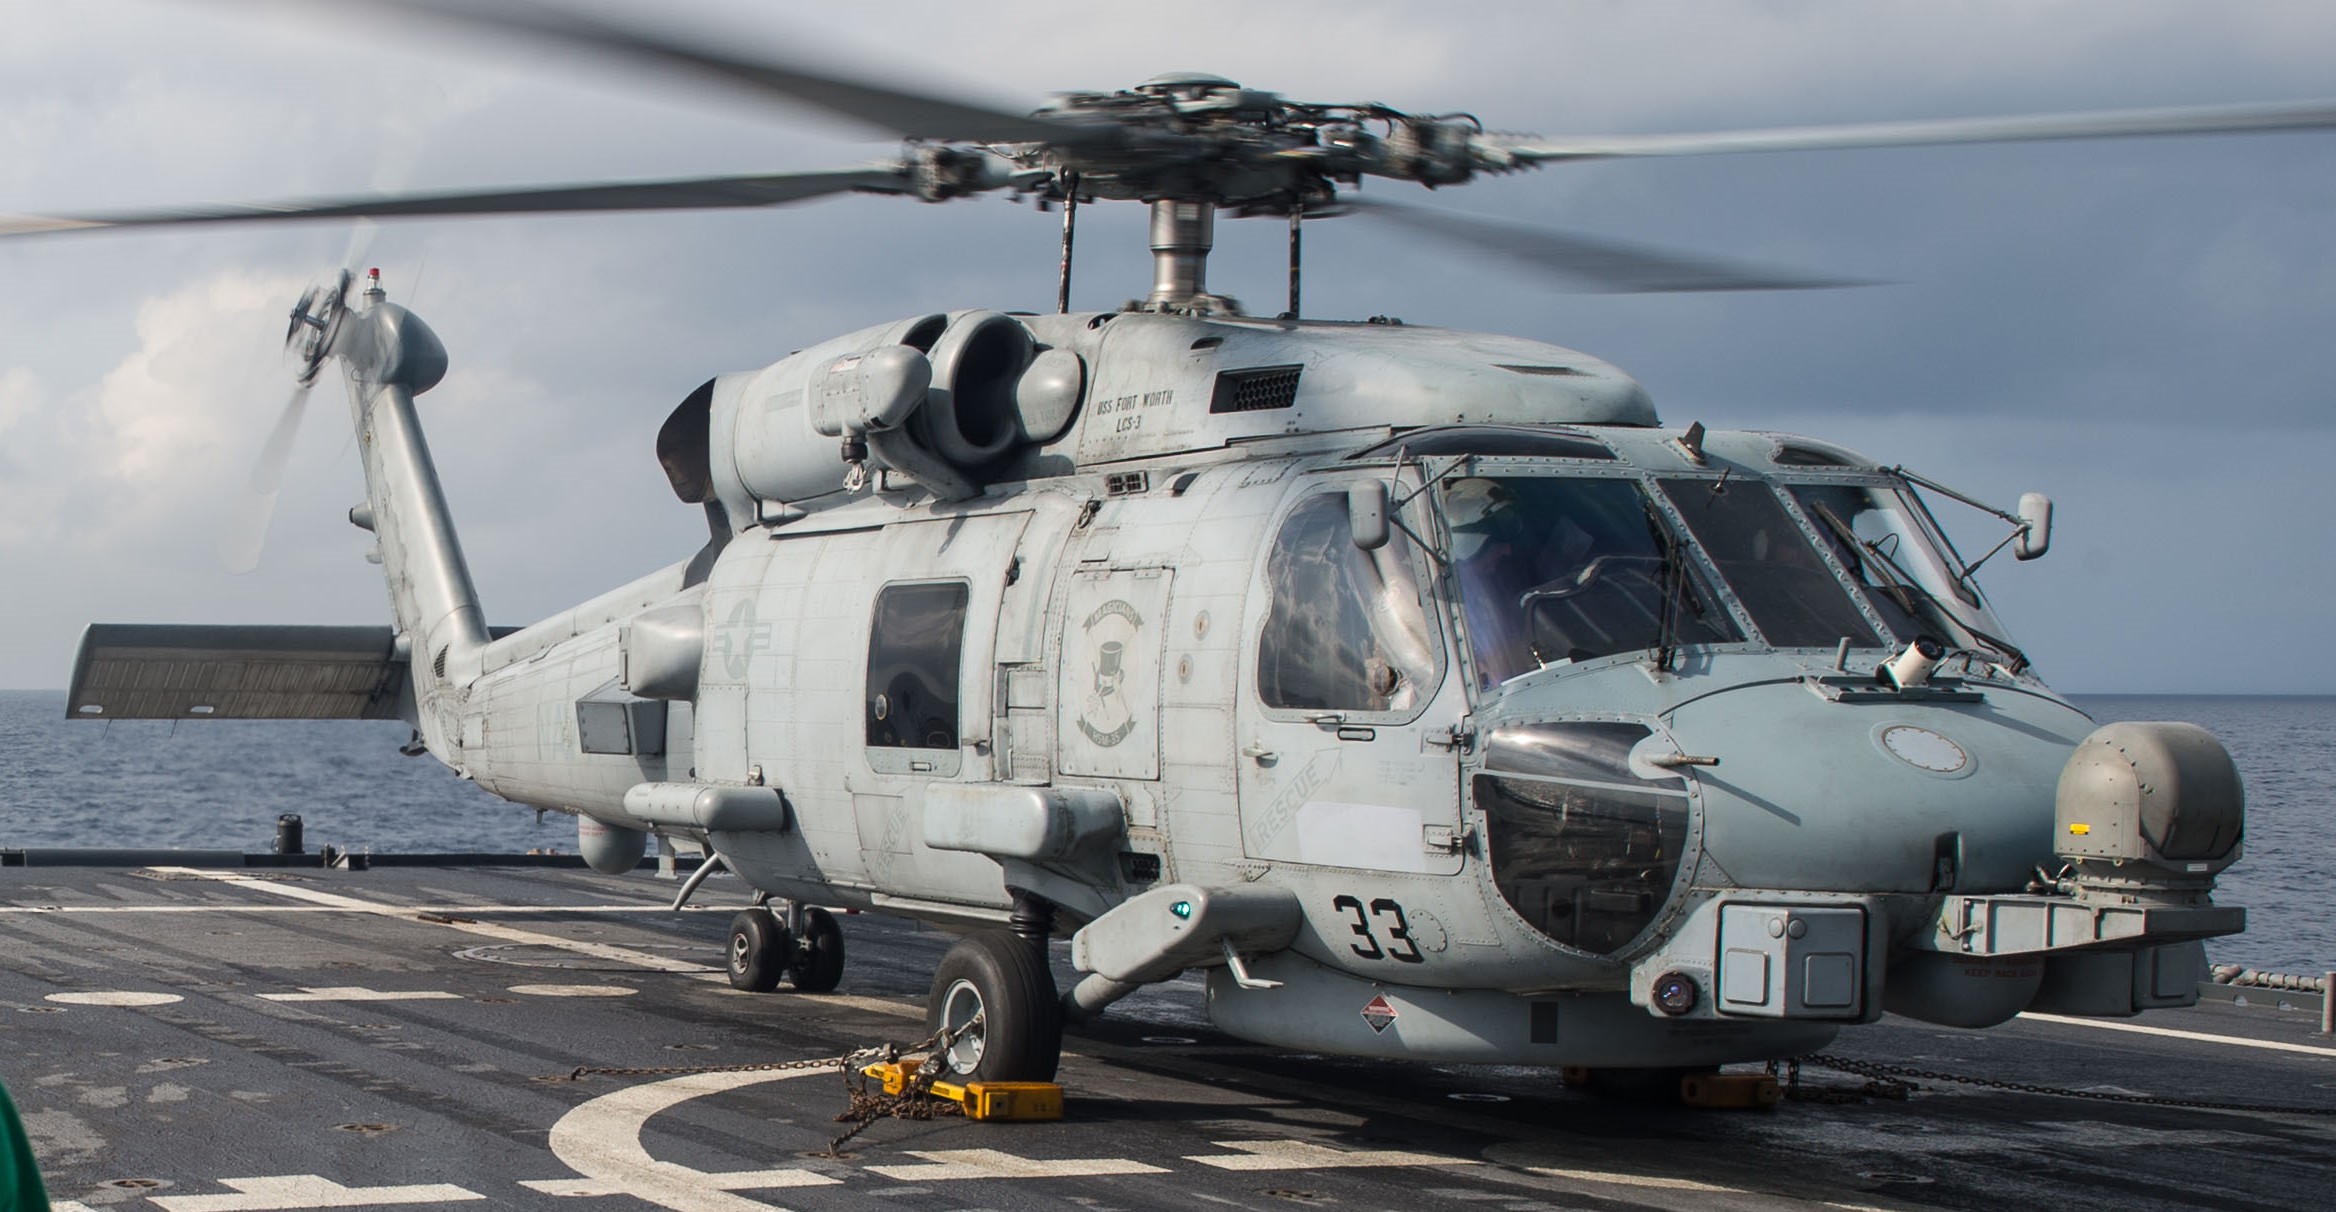 hsm-35 magicians helicopter maritime strike squadron us navy mh-60r seahawk uss fort worth lcs-3 11